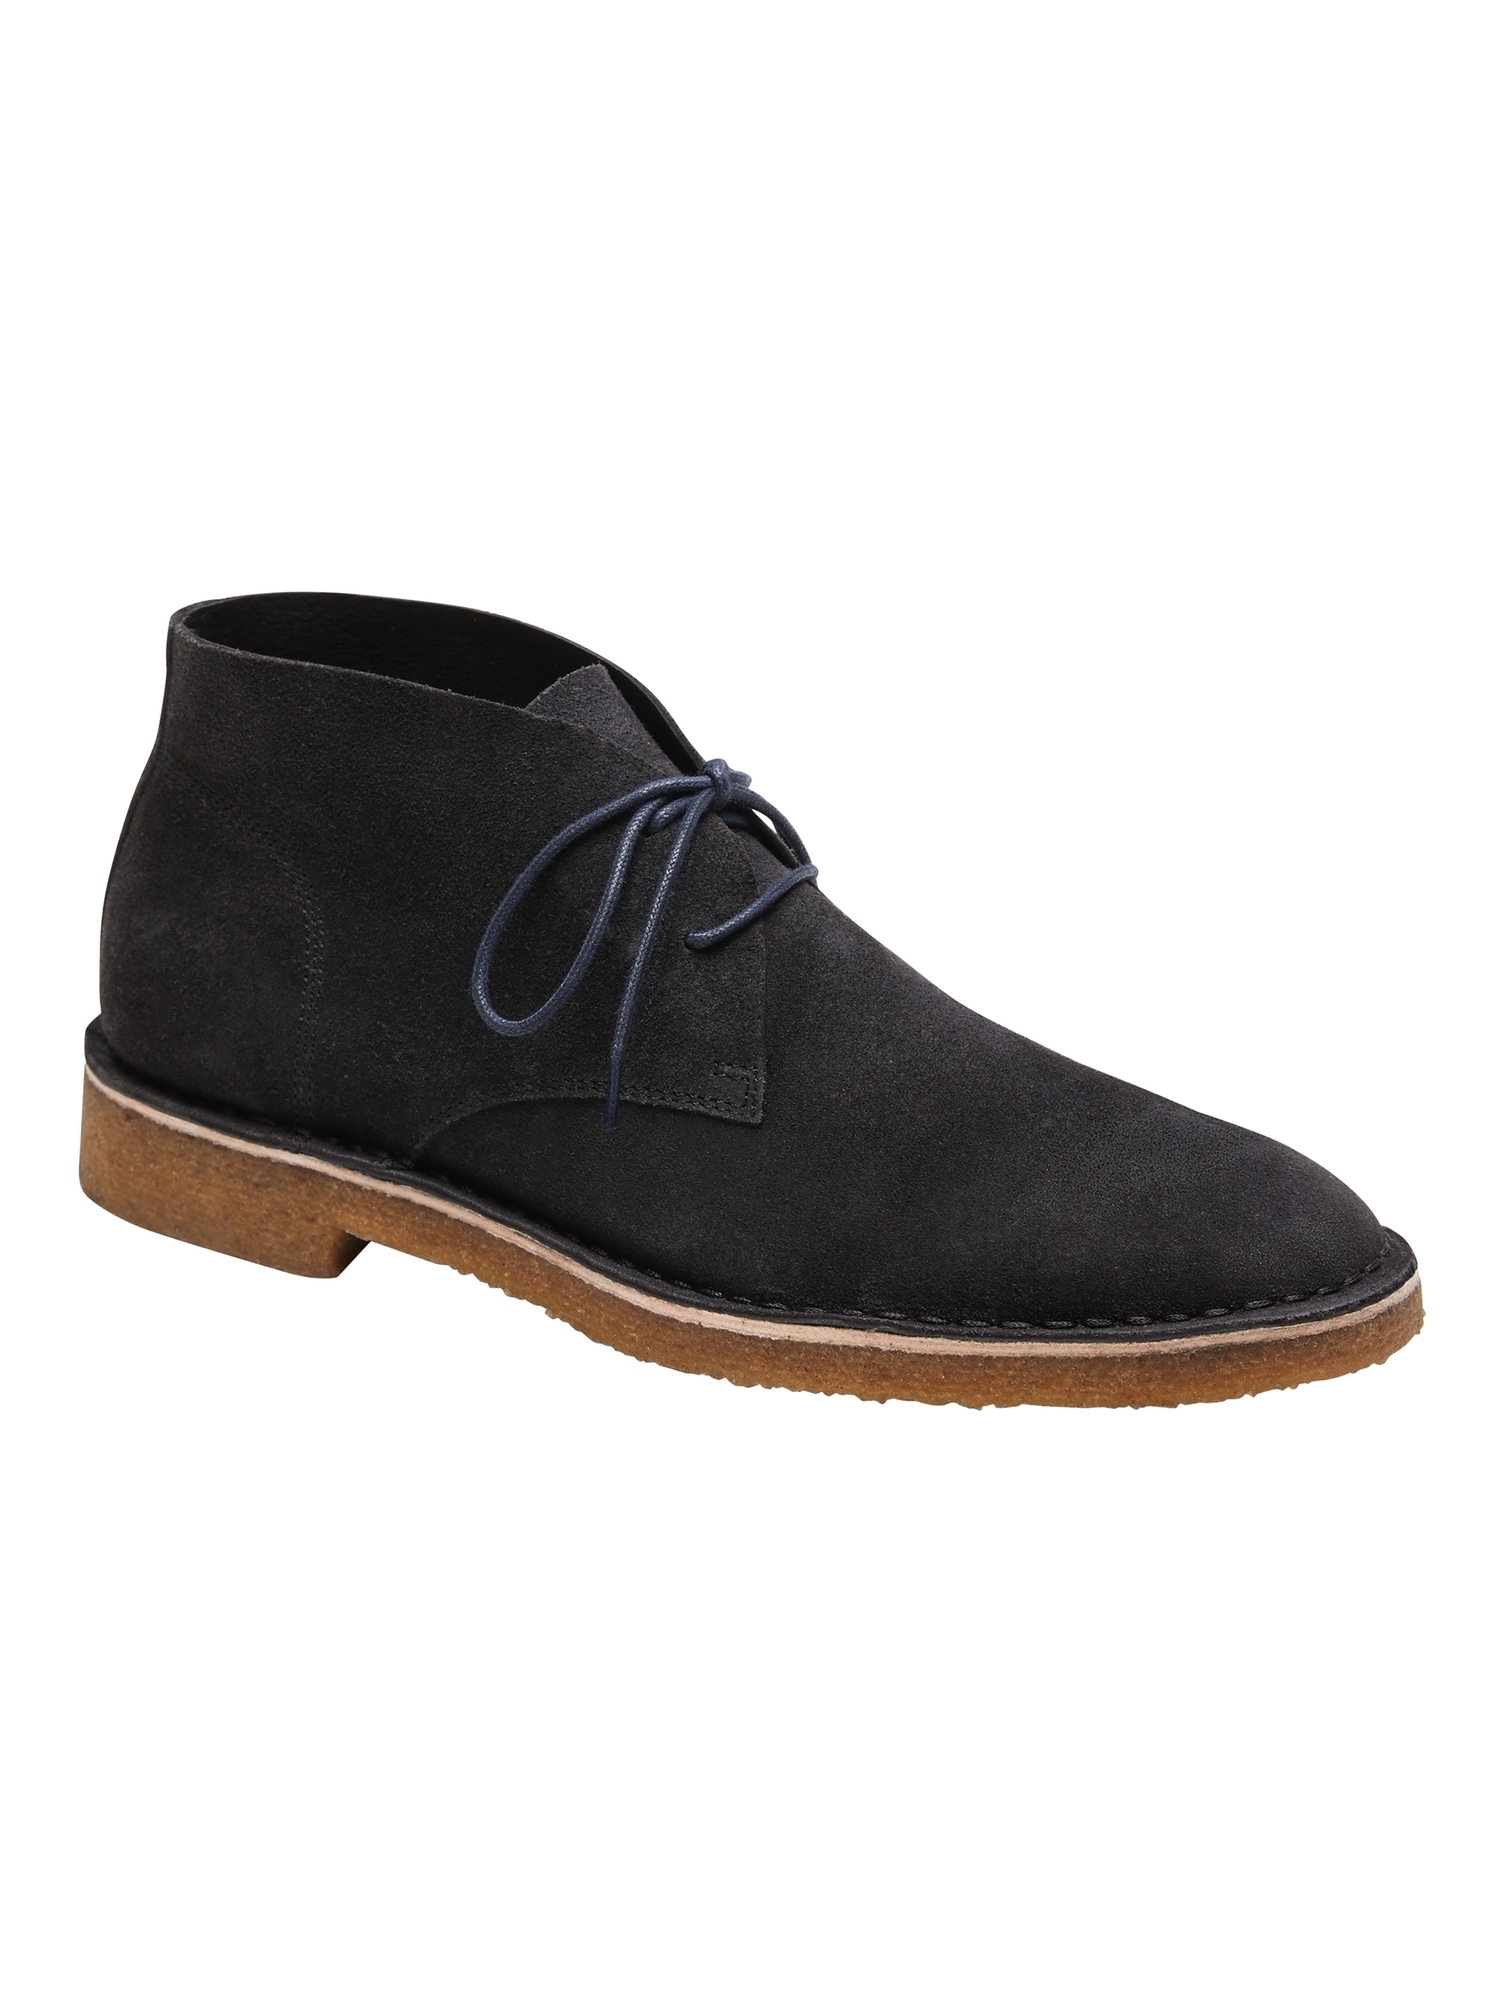 Brendt Crepe-Sole Chukka Boot